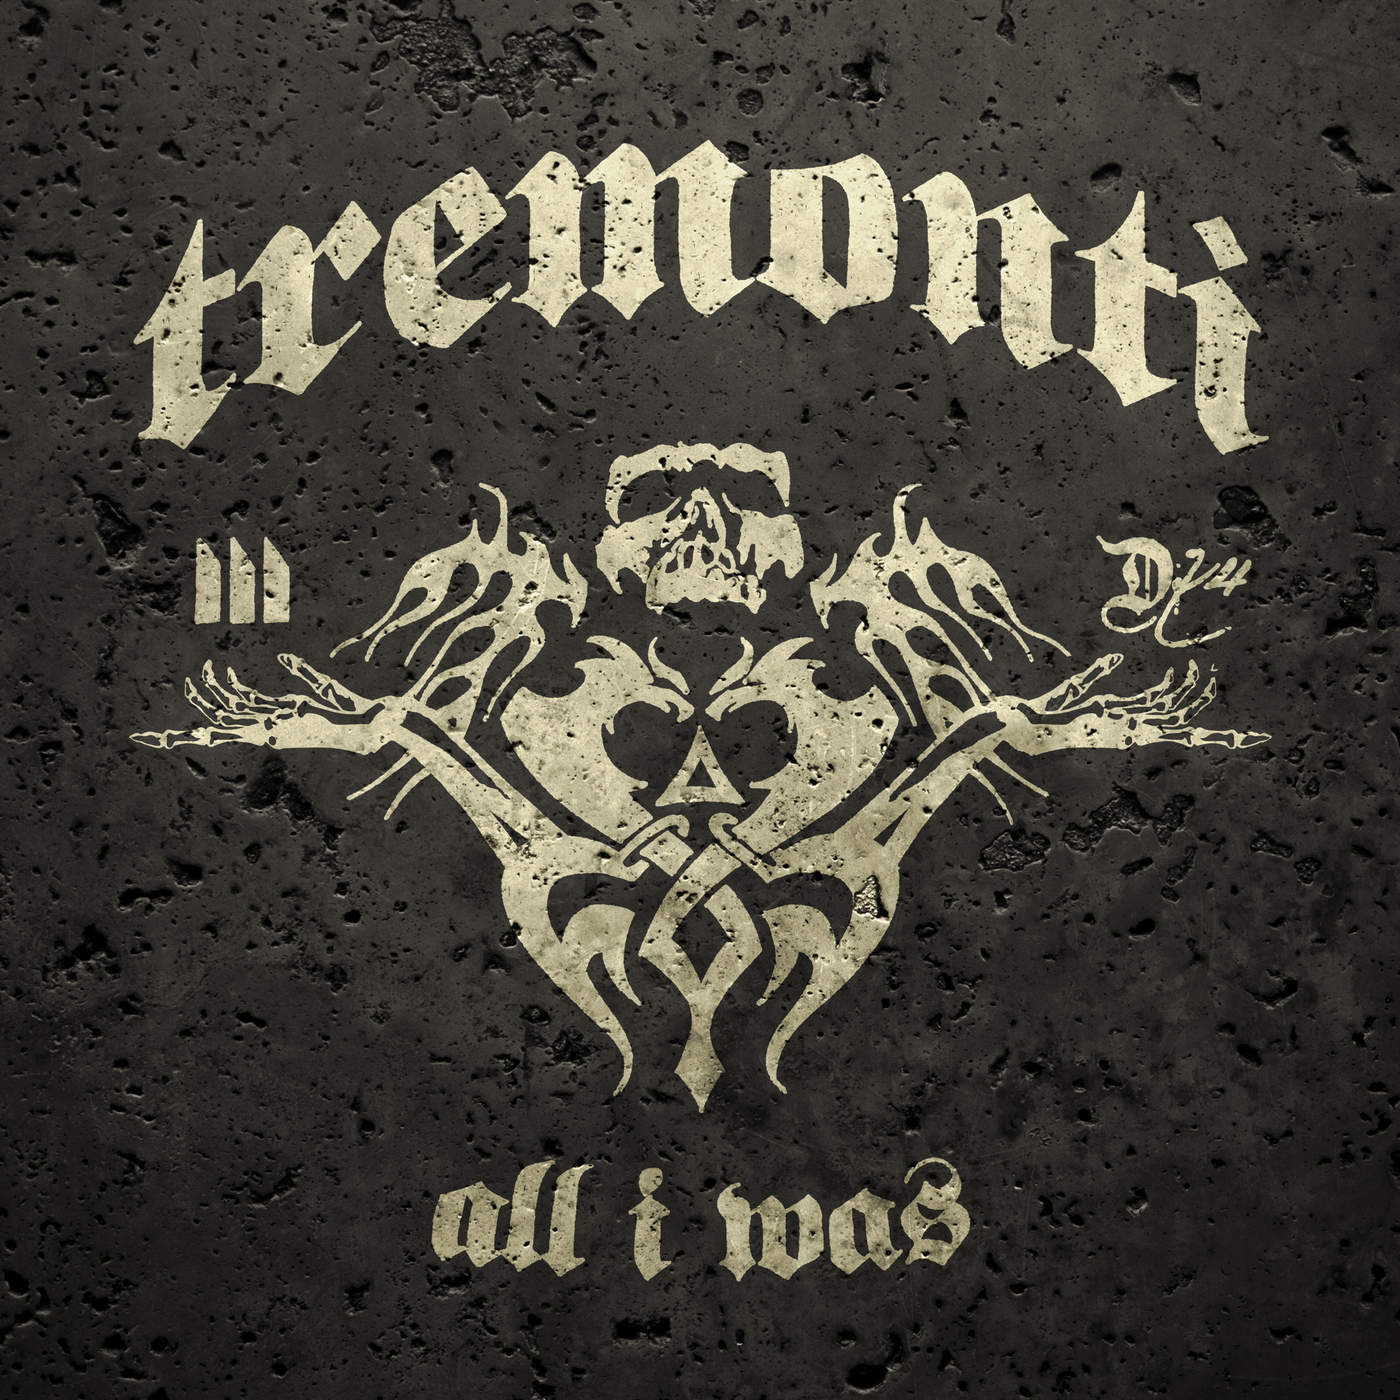 Art for The Things I've Seen by Tremonti